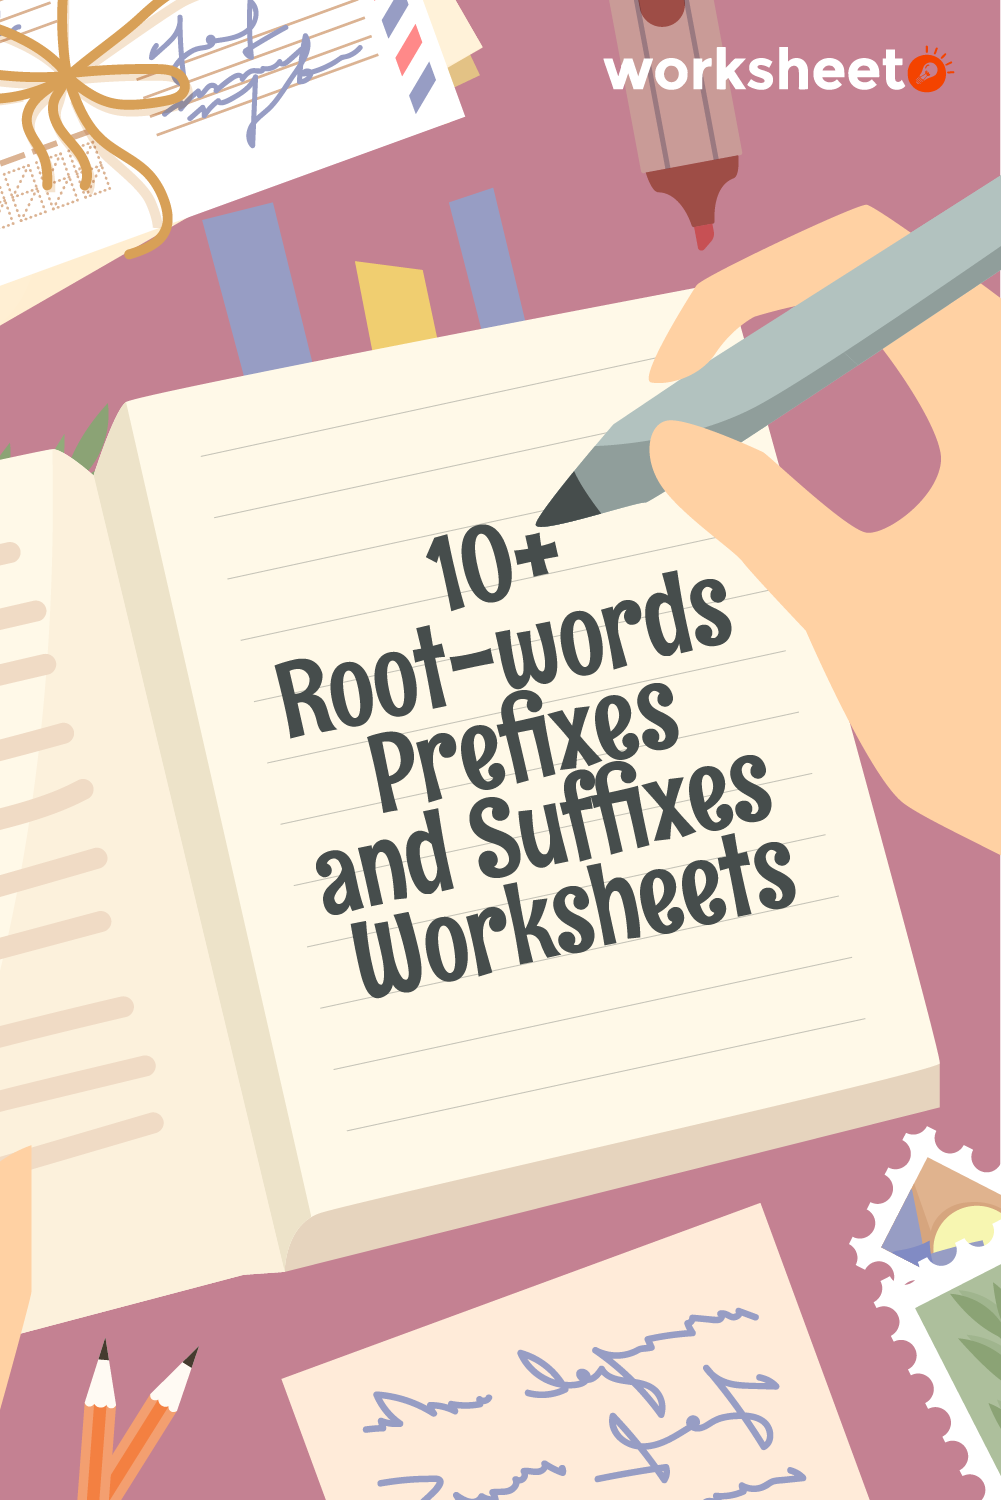 9 Images of ROOT-WORDS Prefixes And Suffixes Worksheets